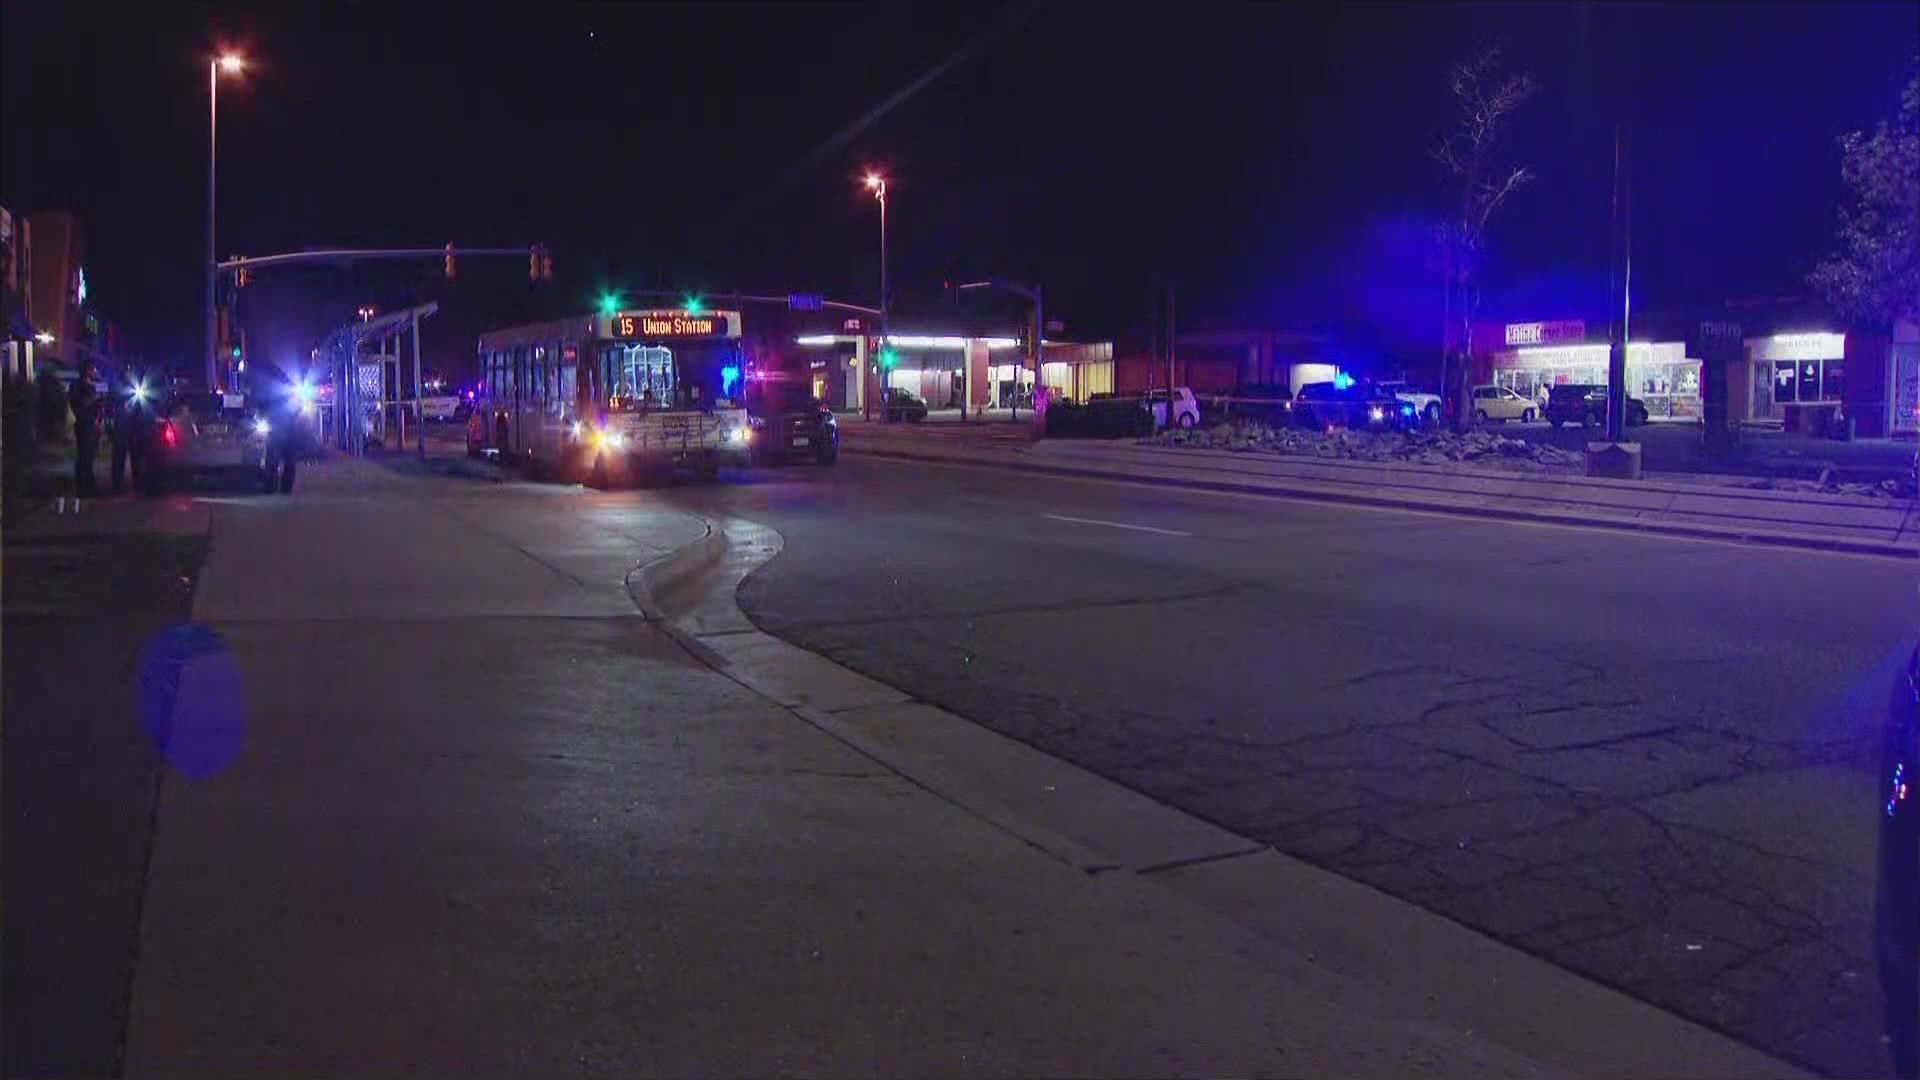 The shooting happened Sunday evening on a #15 bus near the intersection of Colfax Avenue and Moline Street.